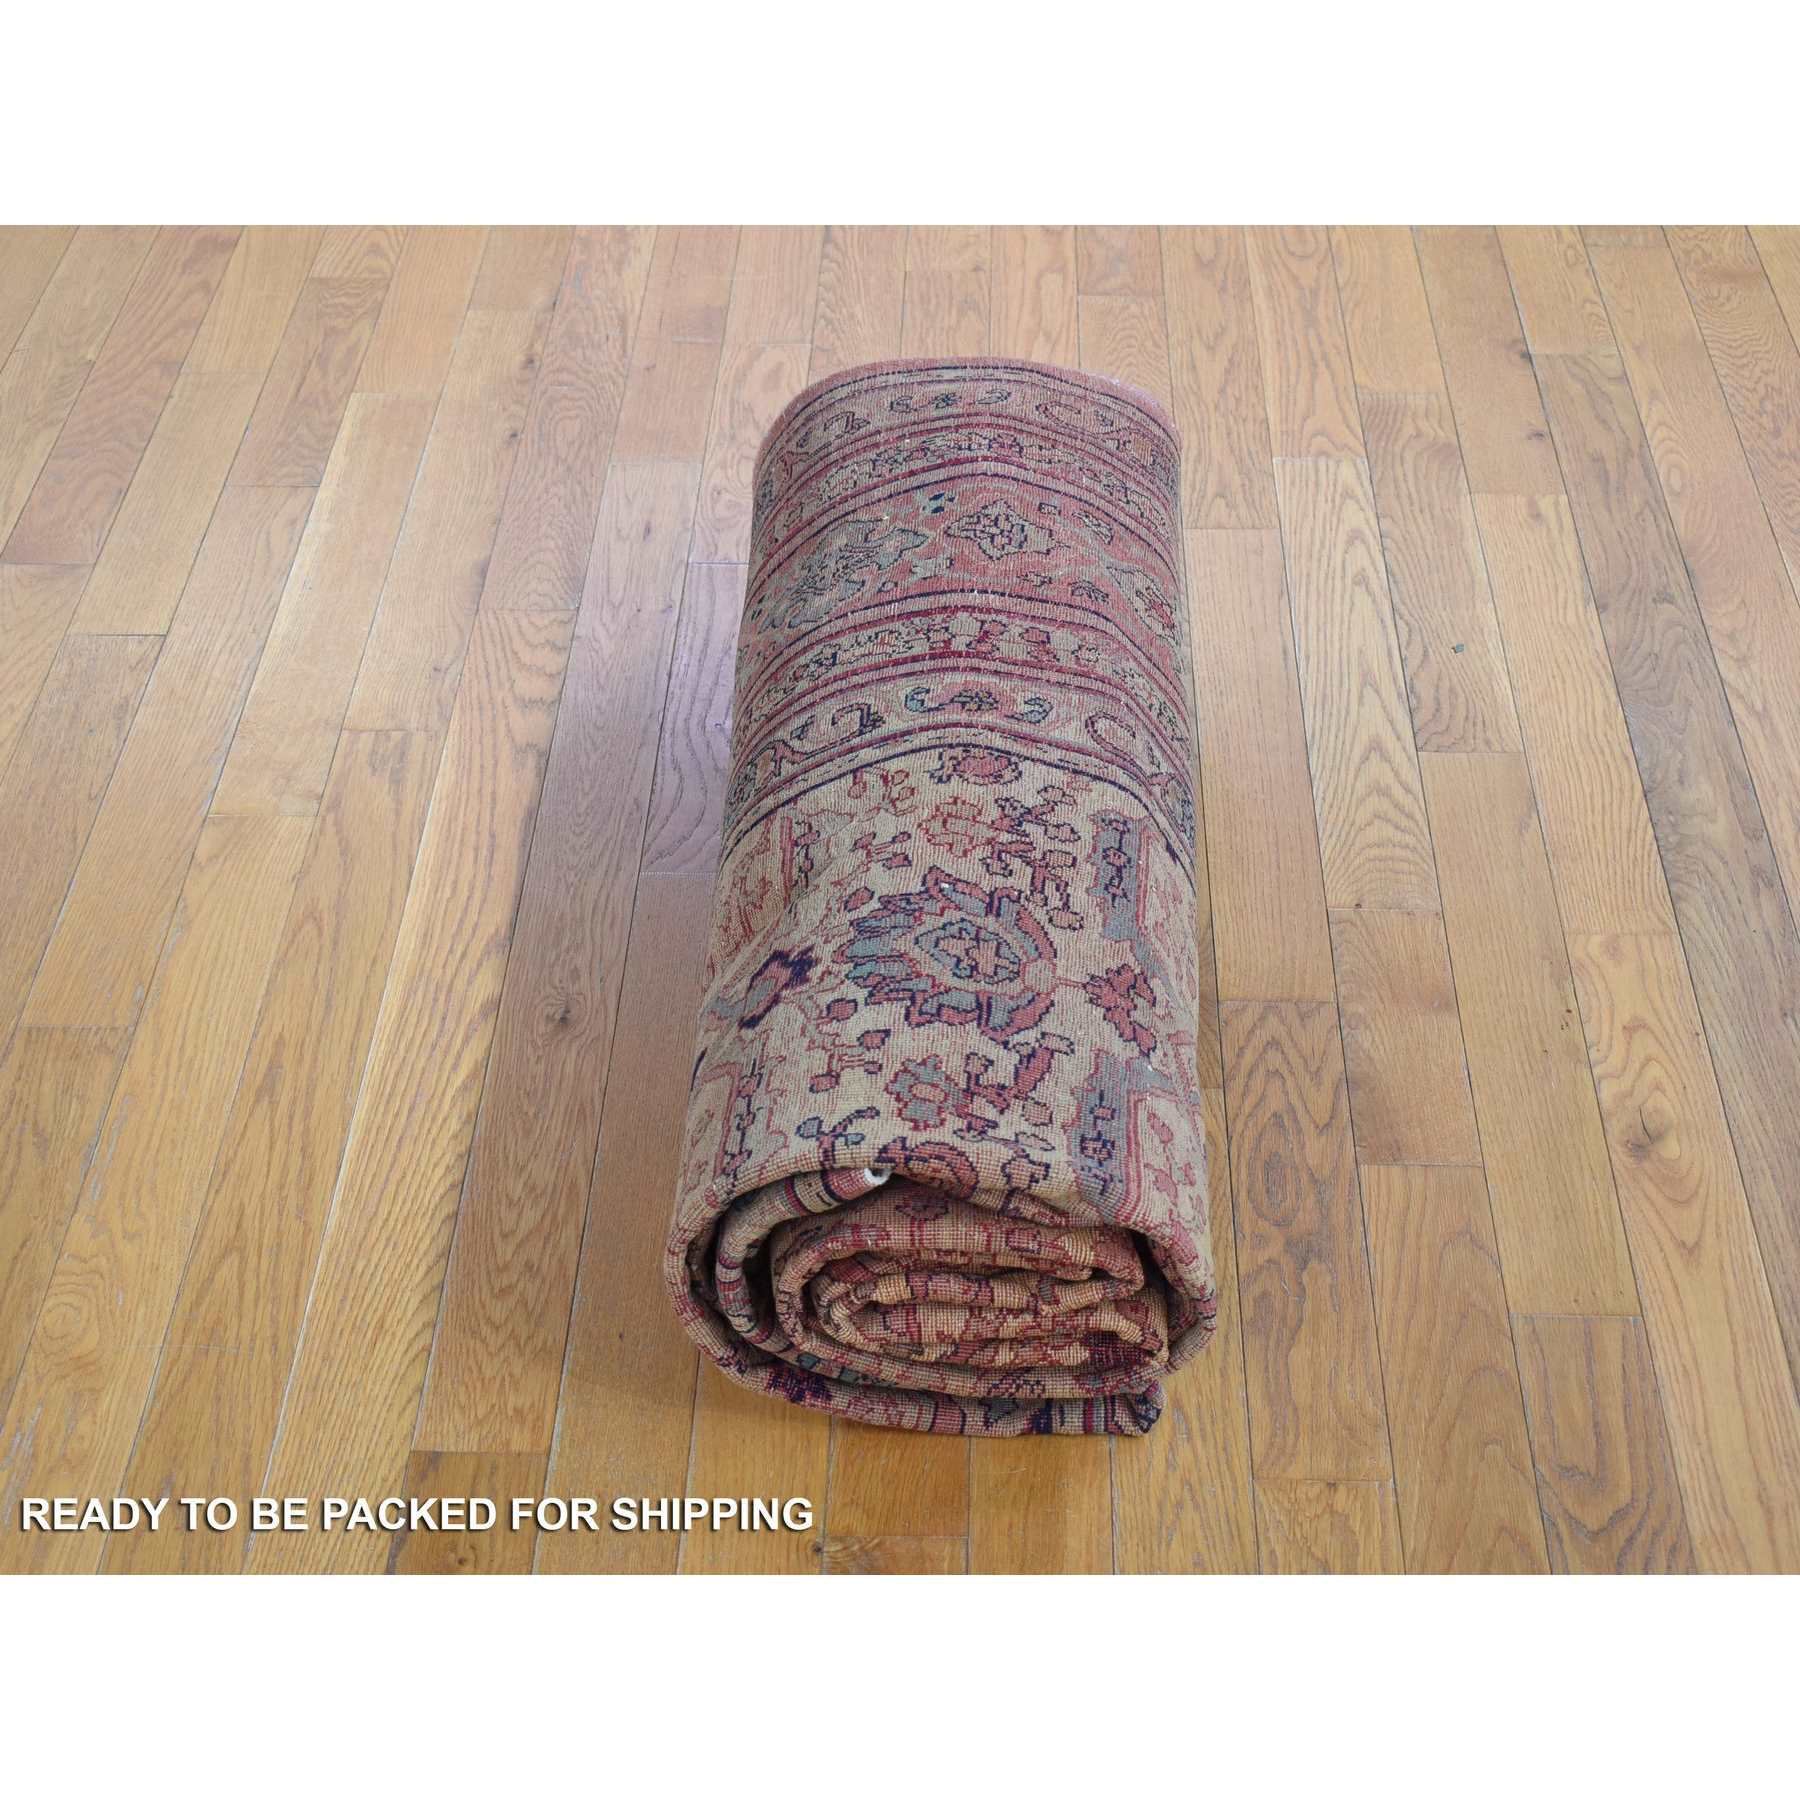 Antique-Hand-Knotted-Rug-400610